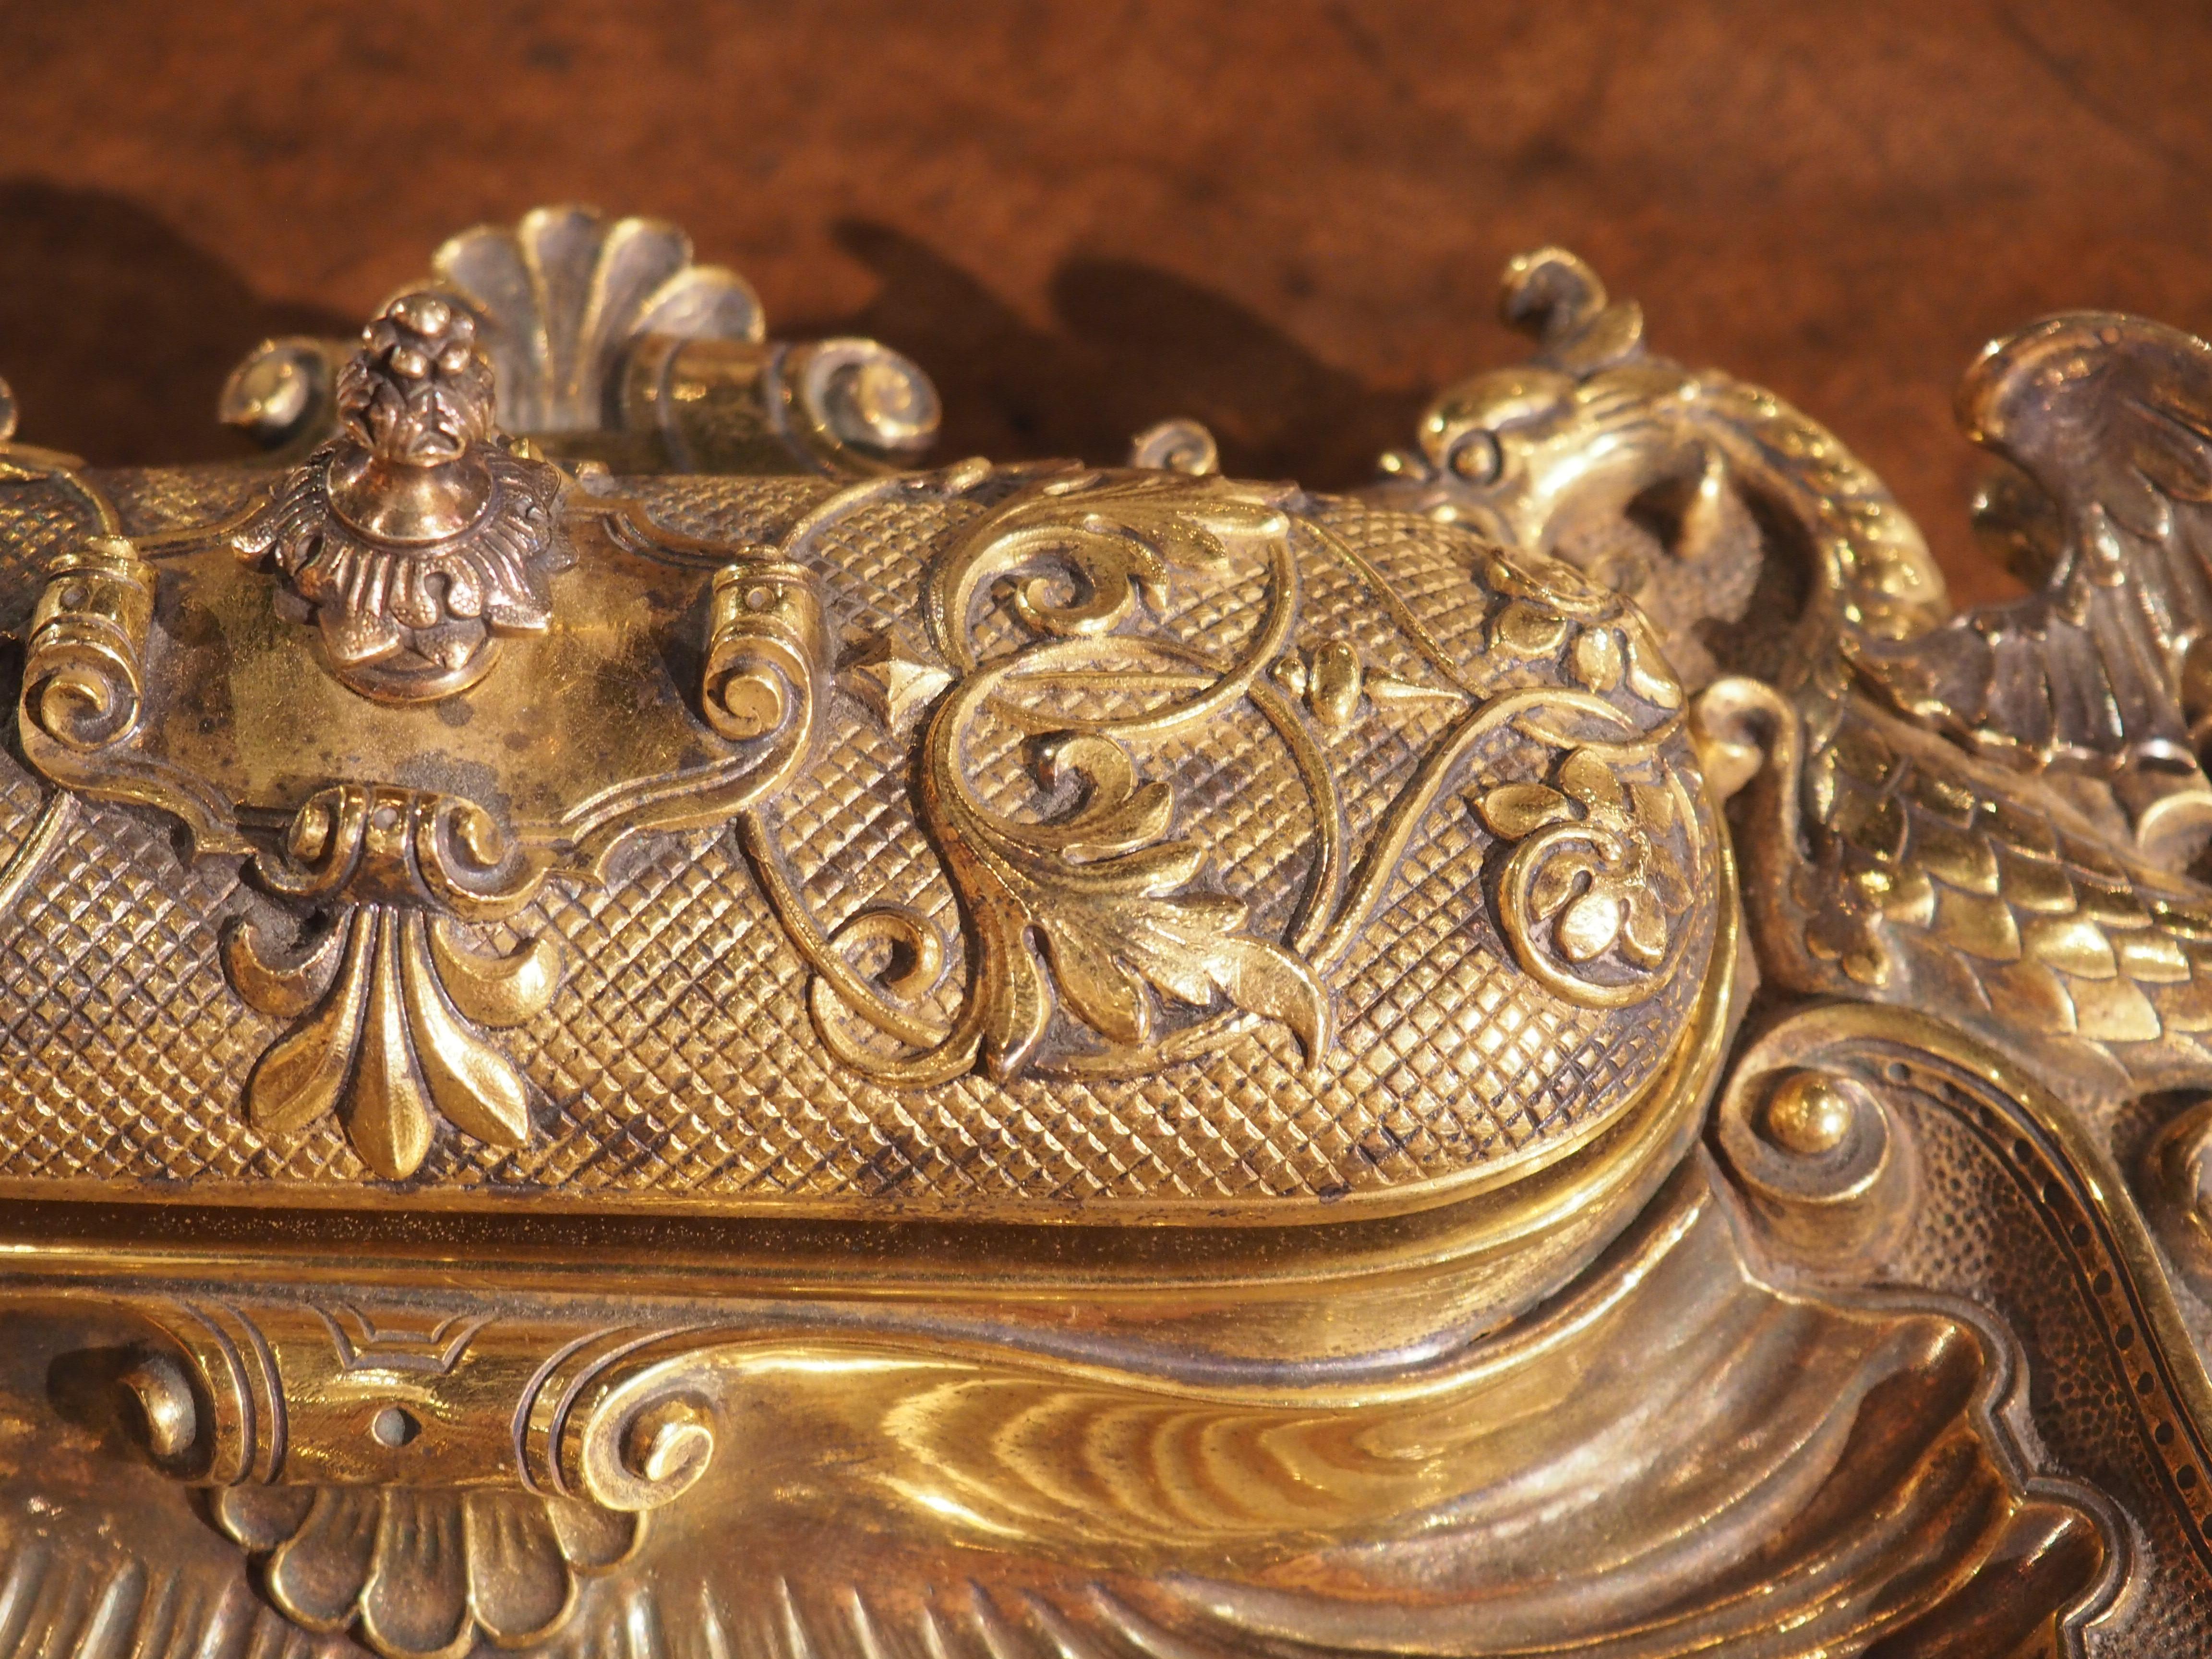 Napoleon III Gilt Bronze Inkwell from France, C. 1840 For Sale 2